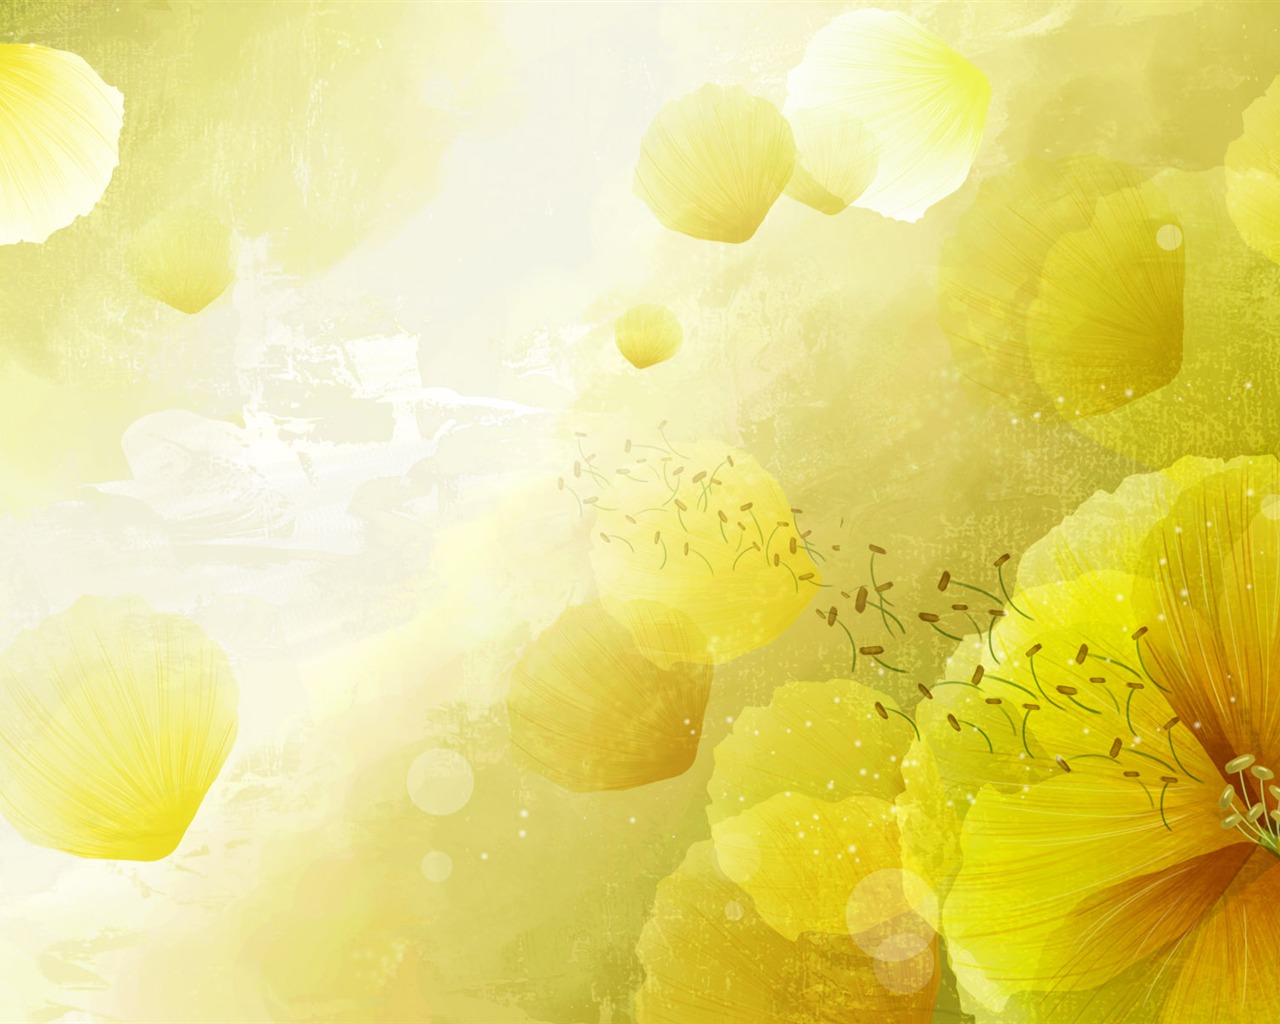 Synthetic Wallpaper Colorful Flower #18 - 1280x1024